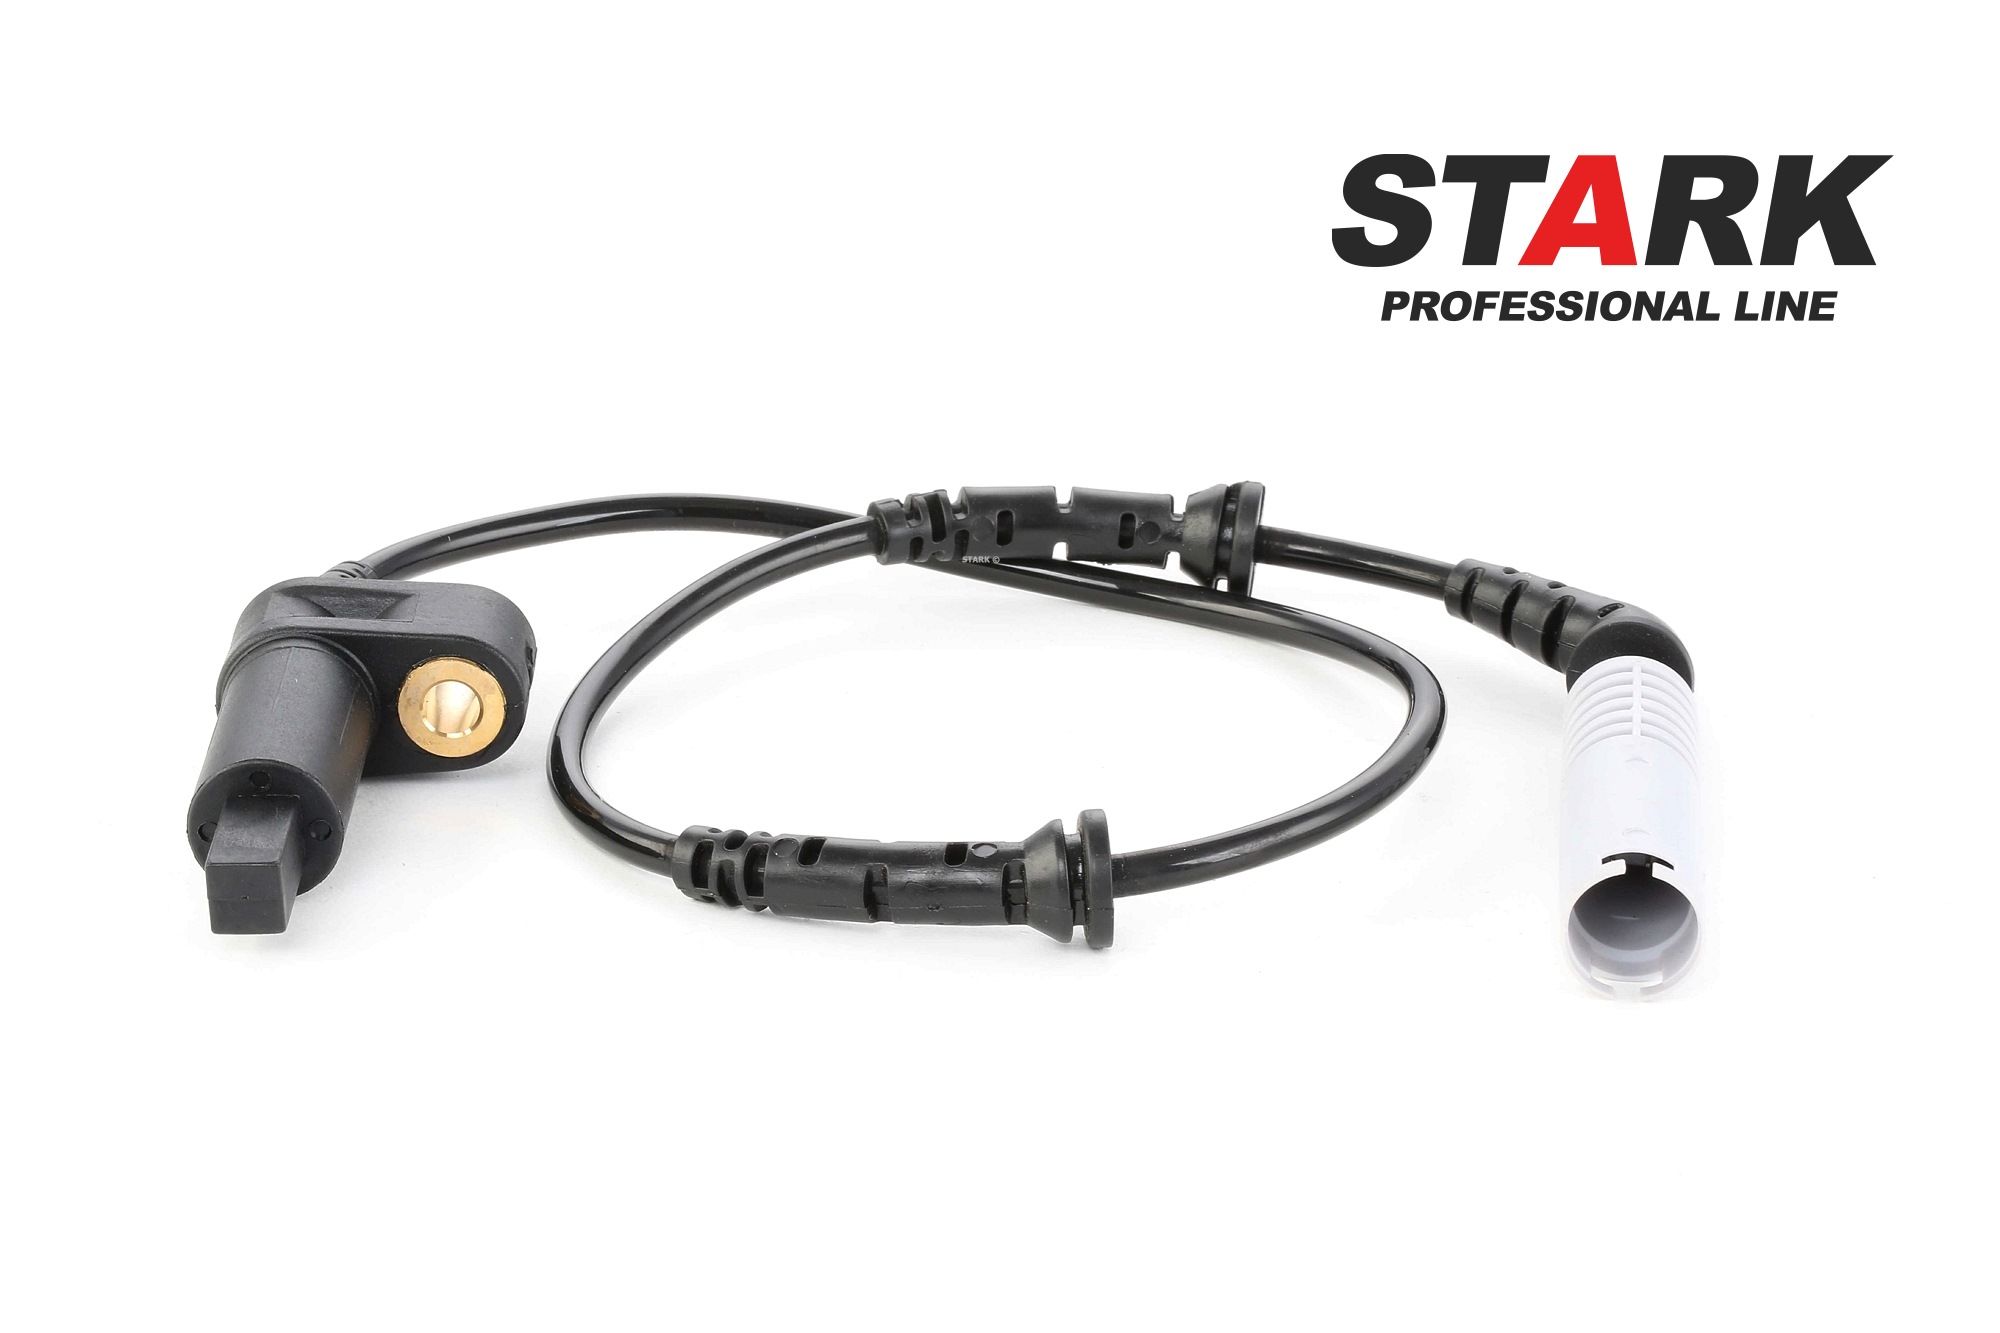 STARK SKWSS-0350071 ABS sensor Front, Front axle both sides, with cable, for vehicles with ABS, Inductive Sensor, Passive sensor, 3-pin connector, 1100 Ohm, 580mm, 650mm, 12V, round